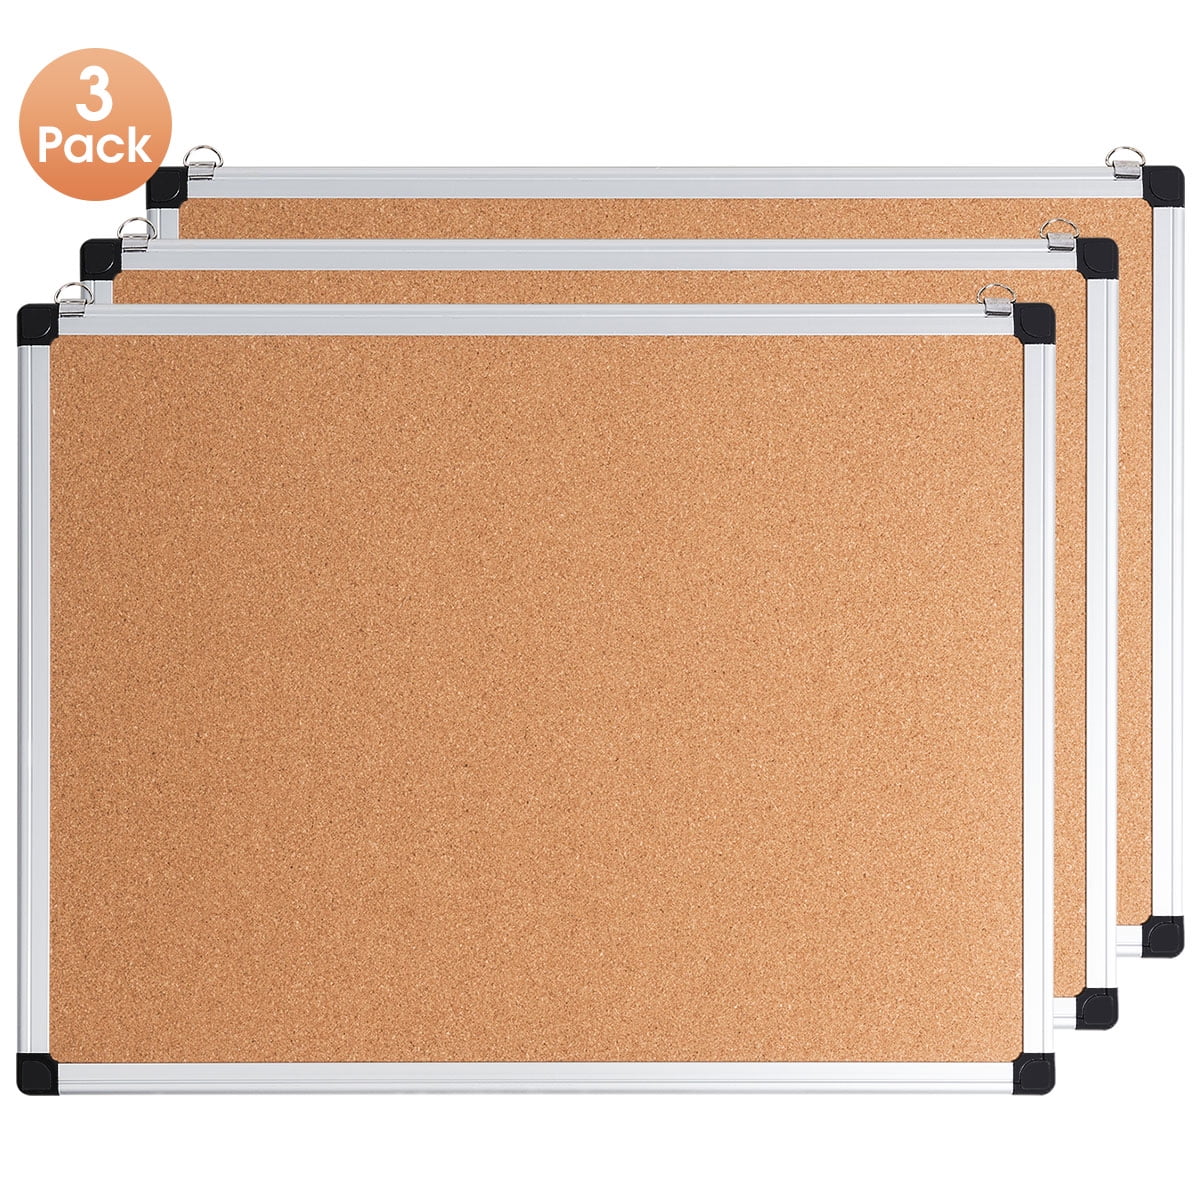 ALUMINIUM FRAMED CORK NOTICE BOARD VARIOUS SIZES SPECIAL OFFER FREE DELIVERY 